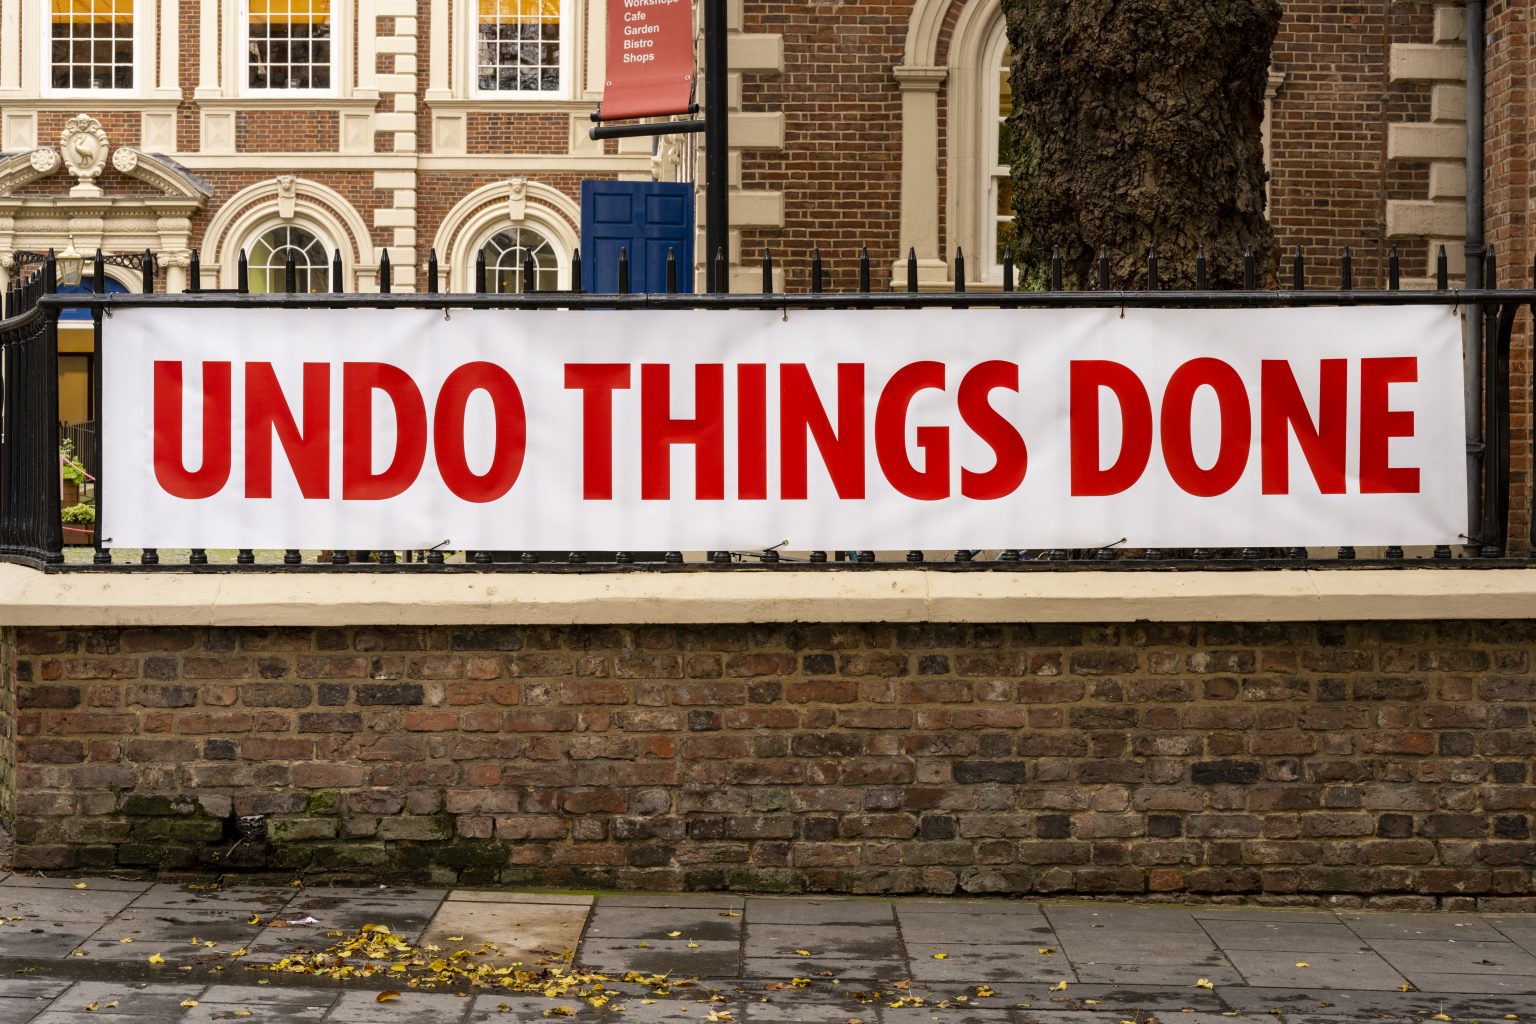 White banner with red text reading 'UNDO THINGS DONE' installed on black railings over a red-brick wall.